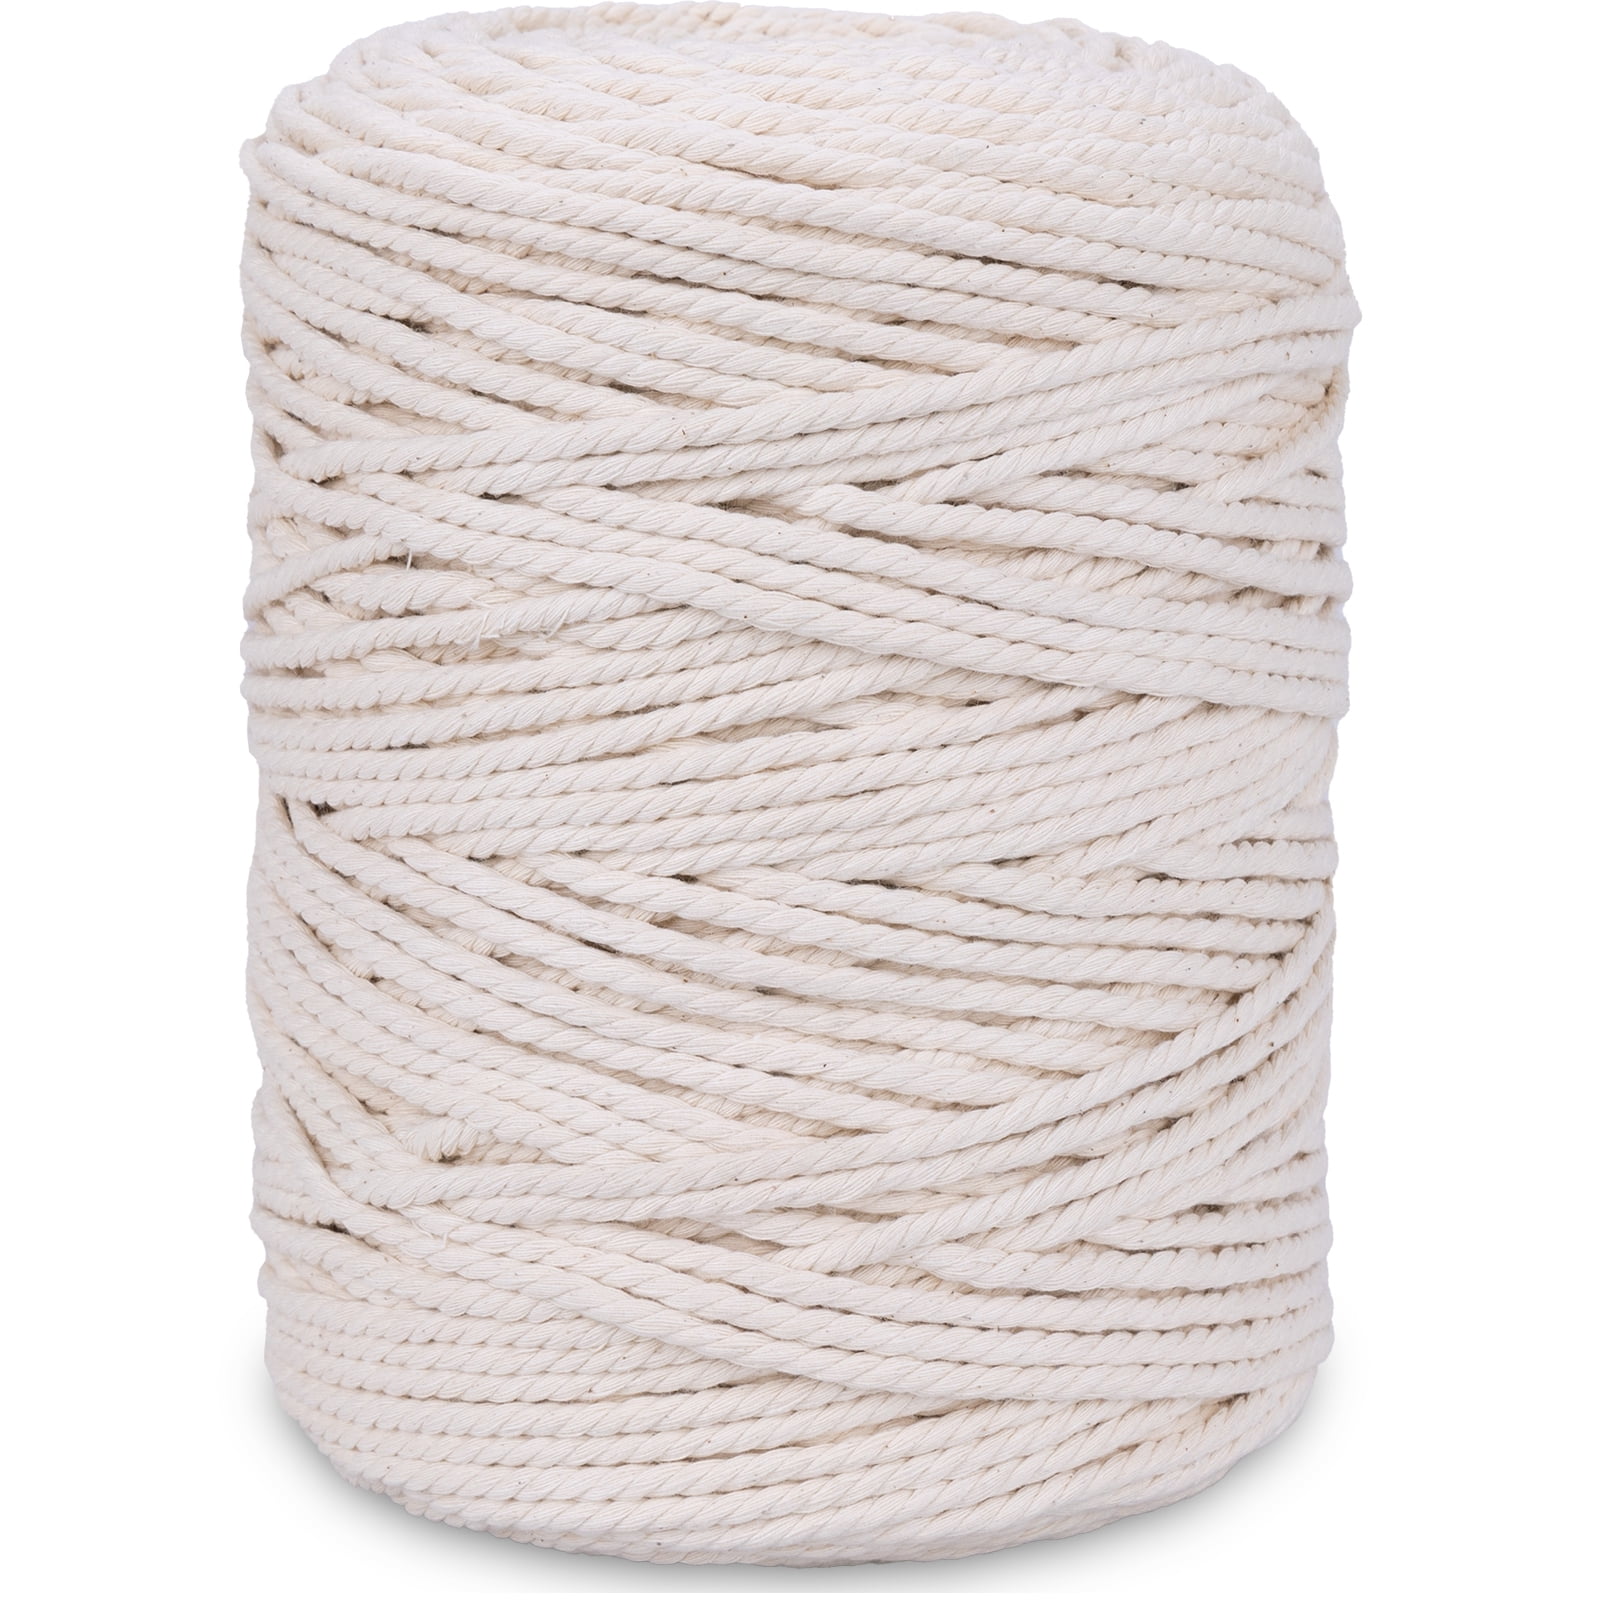  JeogYong Single Strand Macrame Cord 5mm x 109 Yards (328 Feet)  Soft Cotton Rope Macrame Yarn 5 mm Macrame Cord, Macrame Supplies for  Crafts Wall Hangings Plant Hangers Decorations (Natural) 